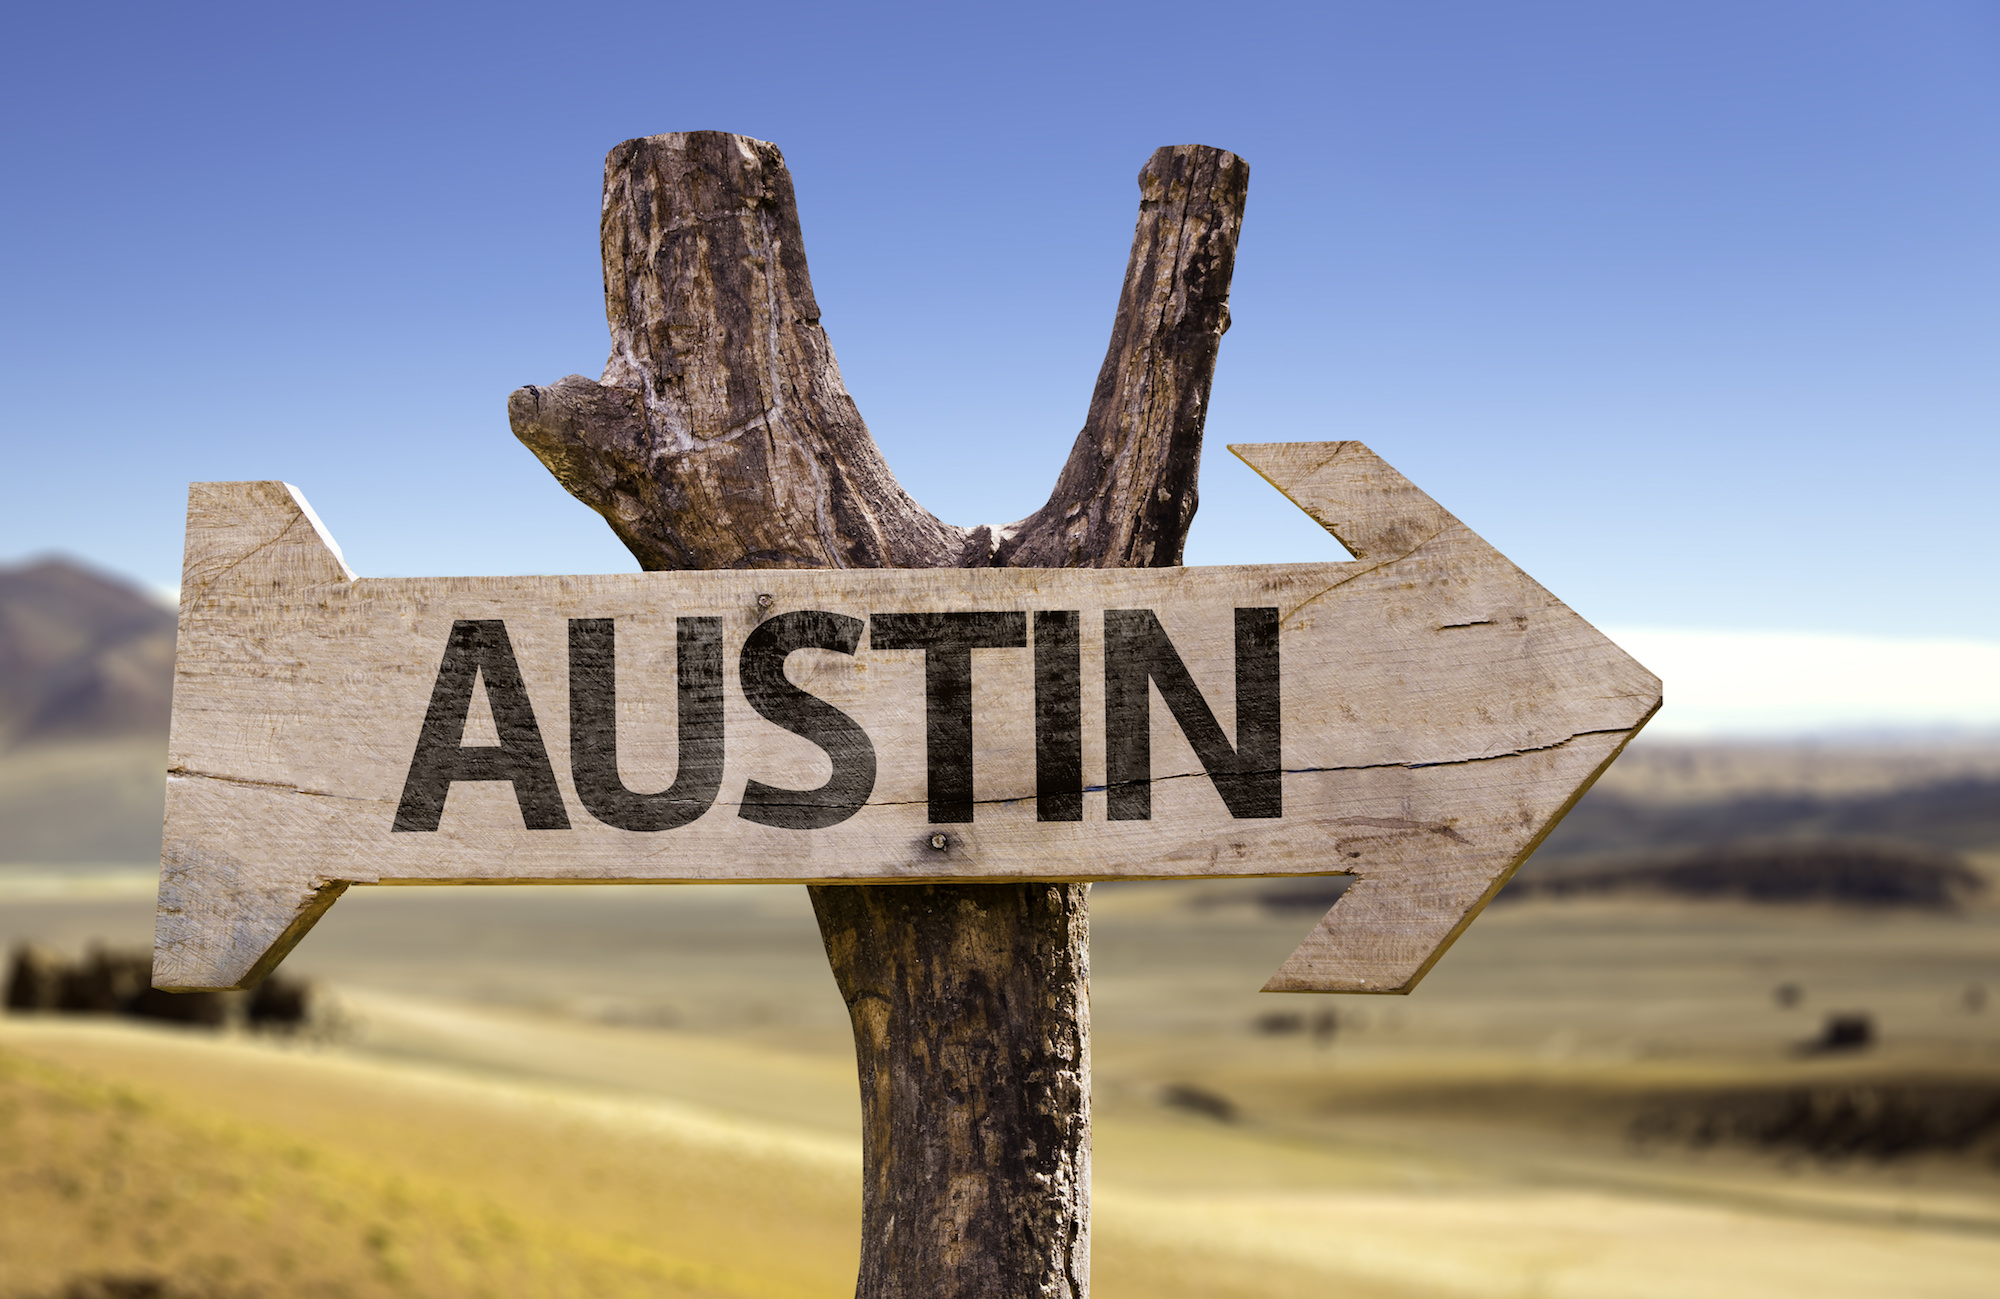 Sign in the shape of an arrow pointing right reads "Austin".